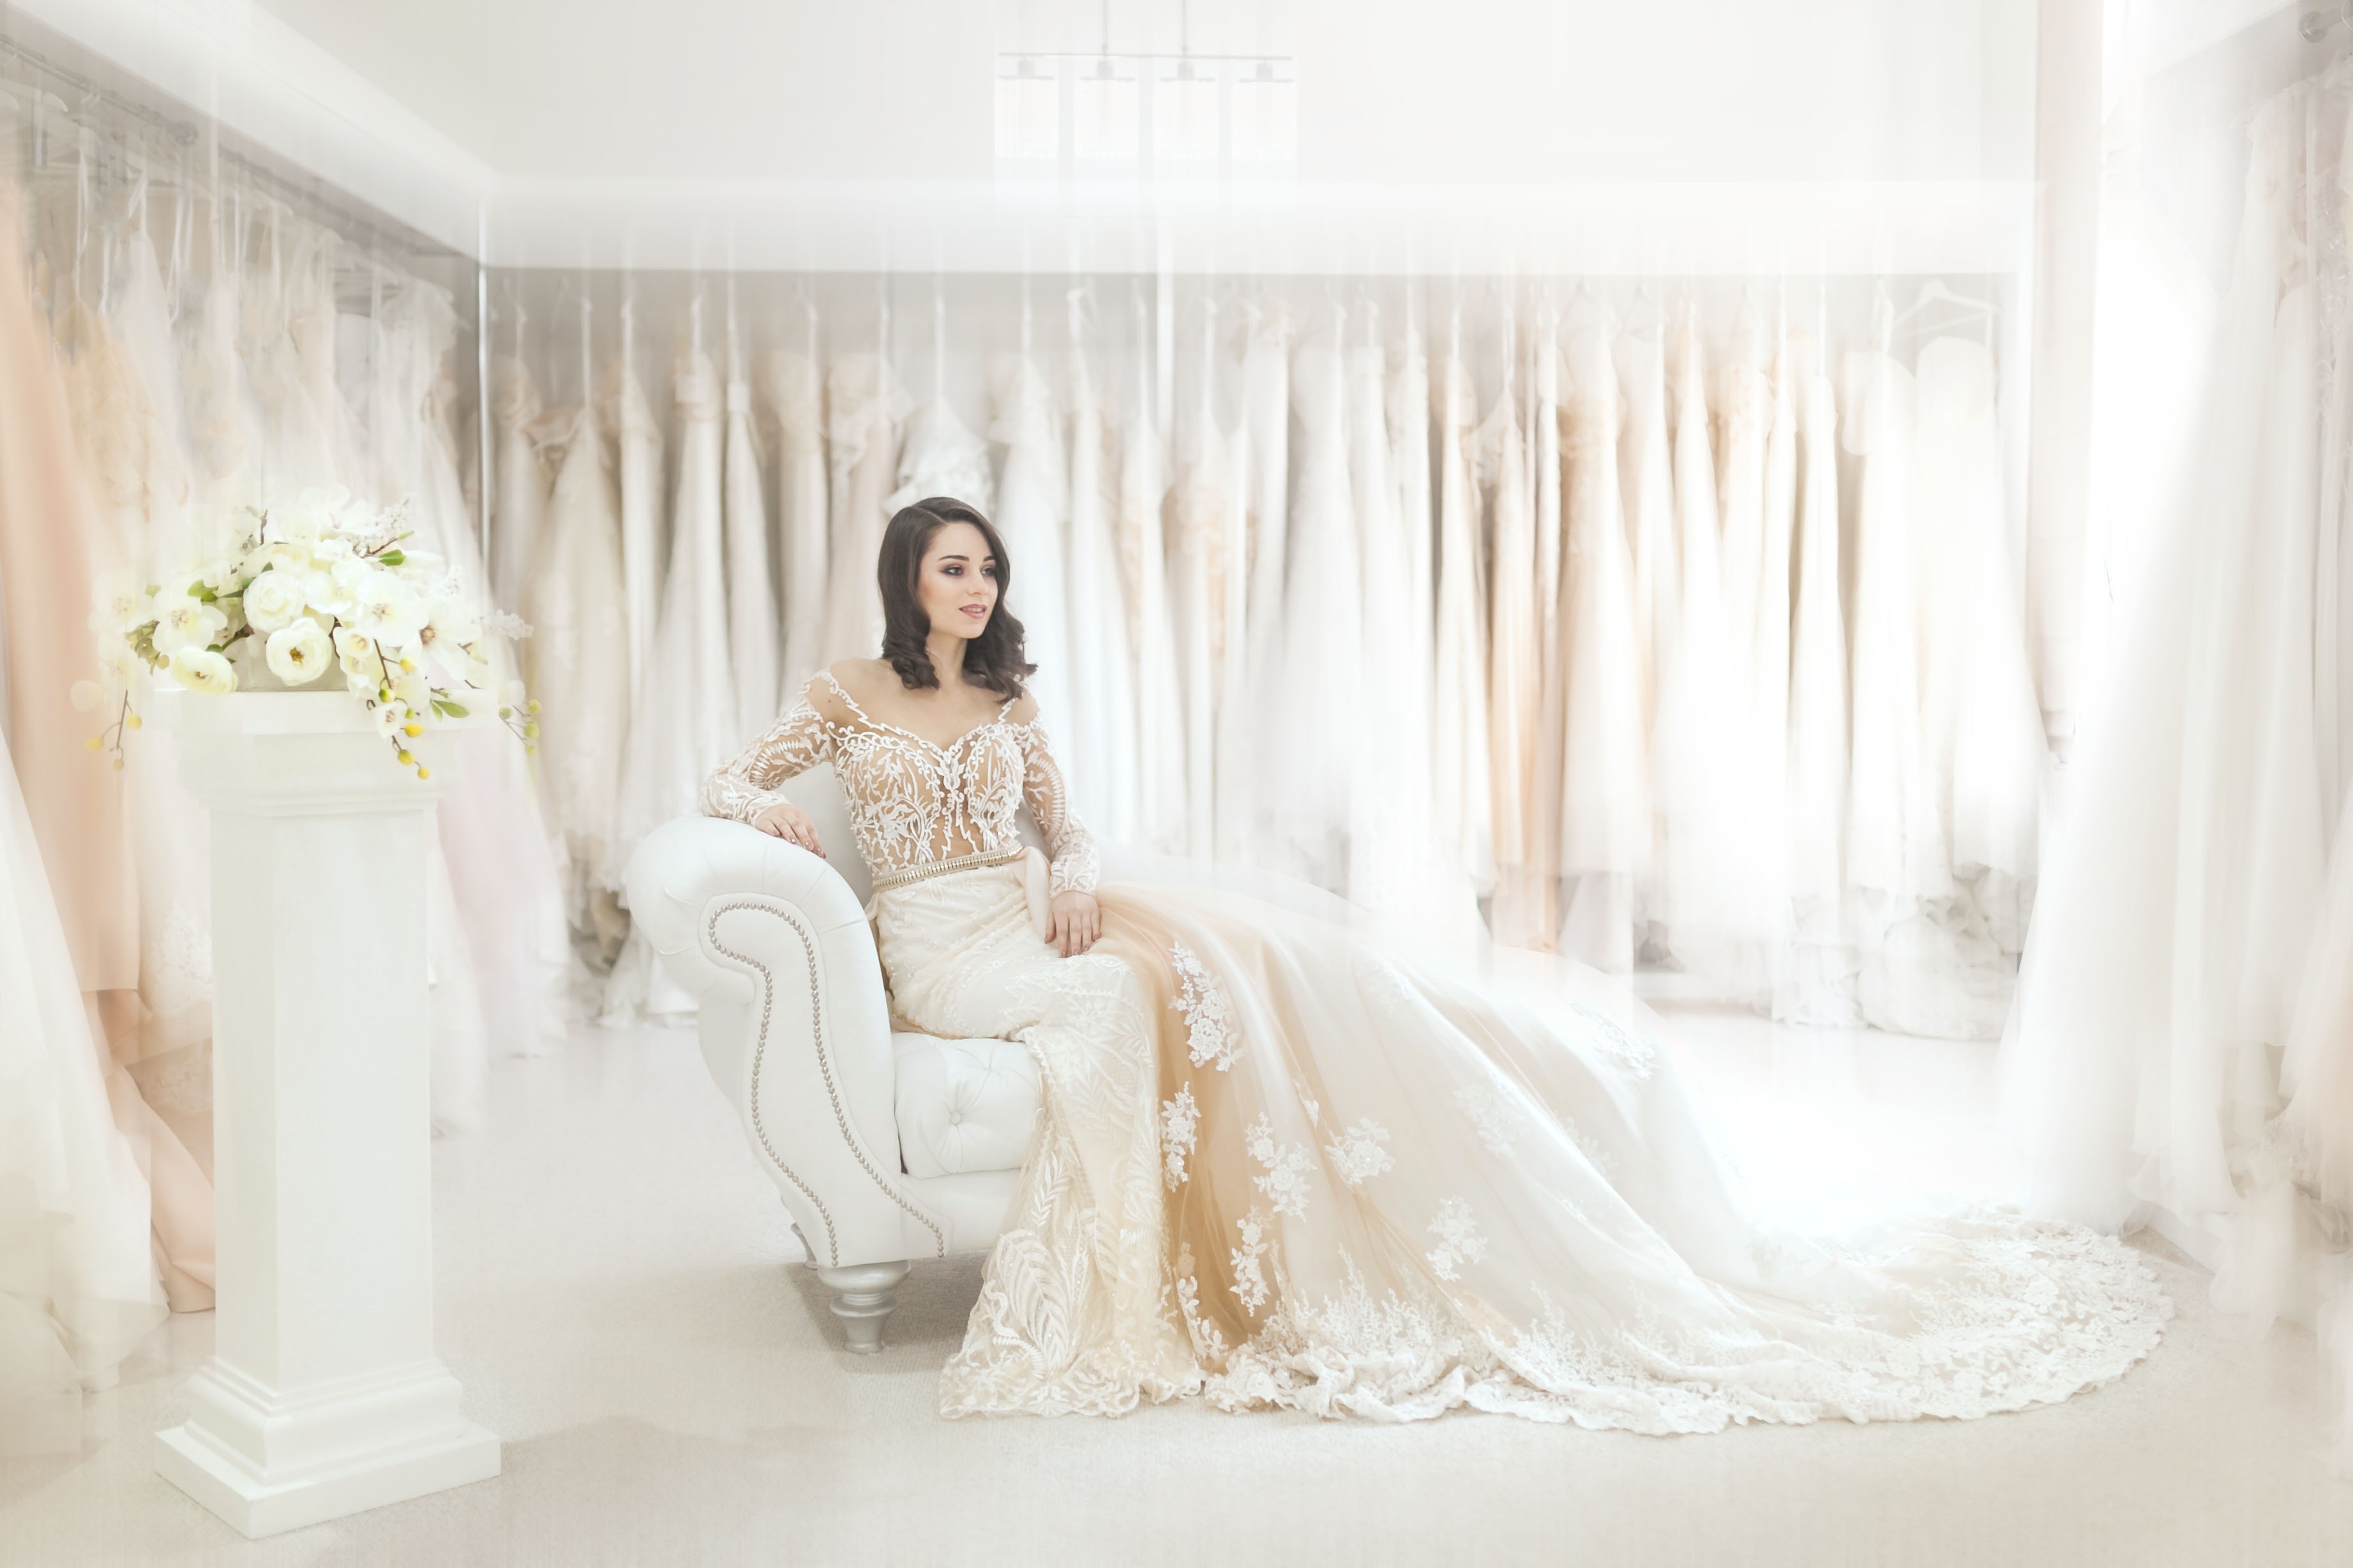 Which Important Factors Should Be Taken Into Consideration While Buying A Wedding Dress